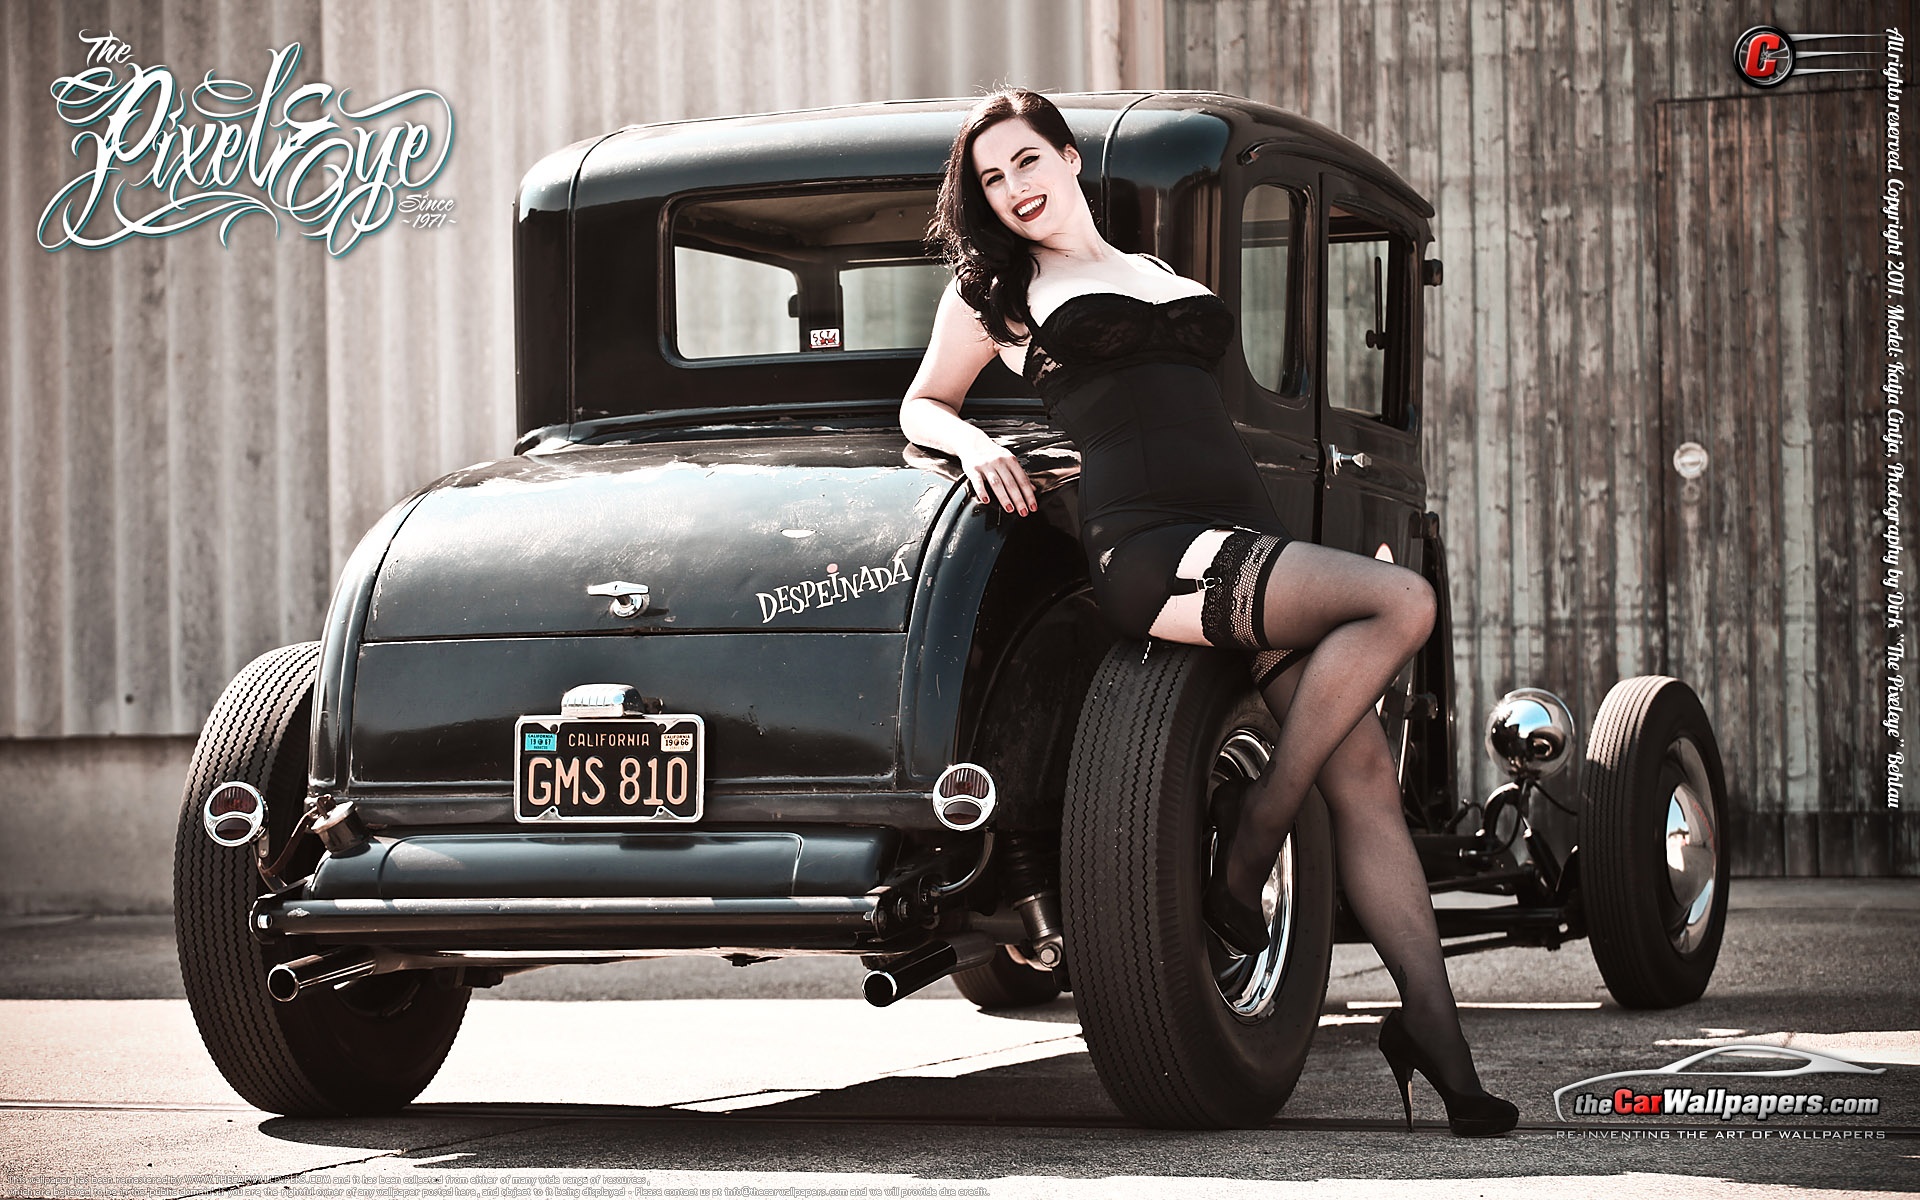 Laura K. Allen Photography and Design: Pinup Posing | Pinup Poses that  bring out the 50s in you! | Nashville pinup photographer Laura K. Allen